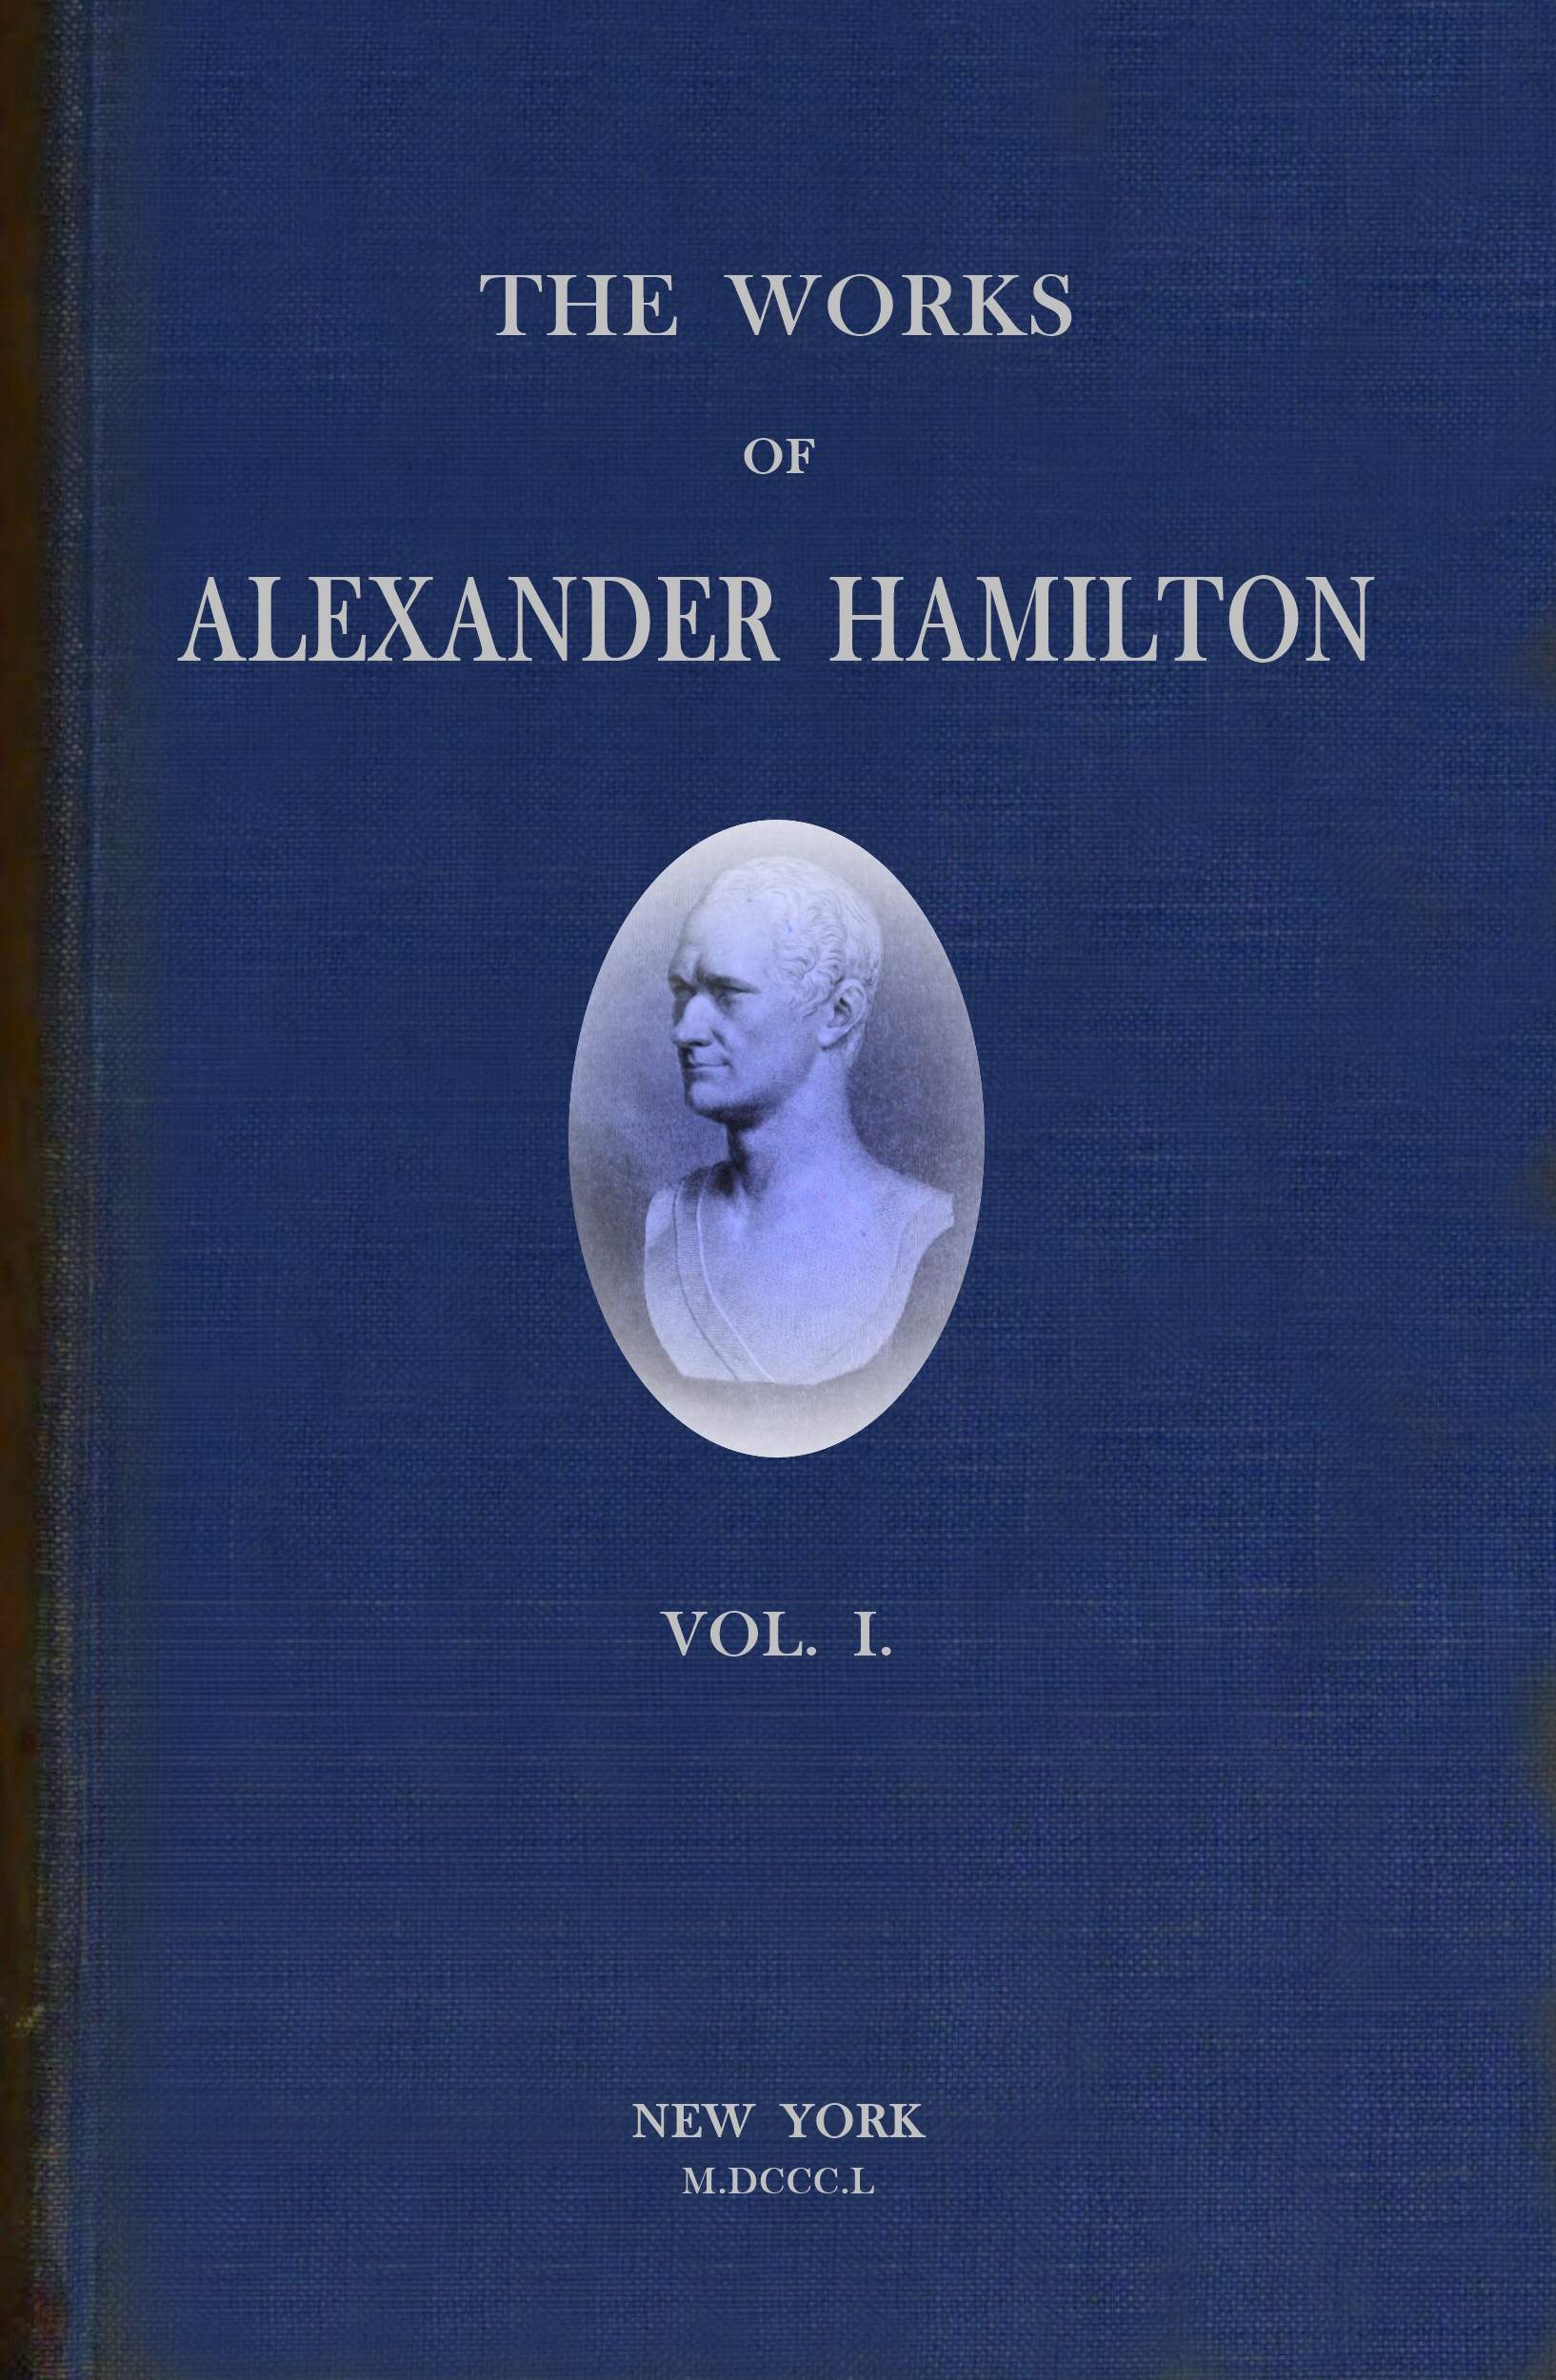 The works of Alexander Hamilton (vol. 1 of 7)